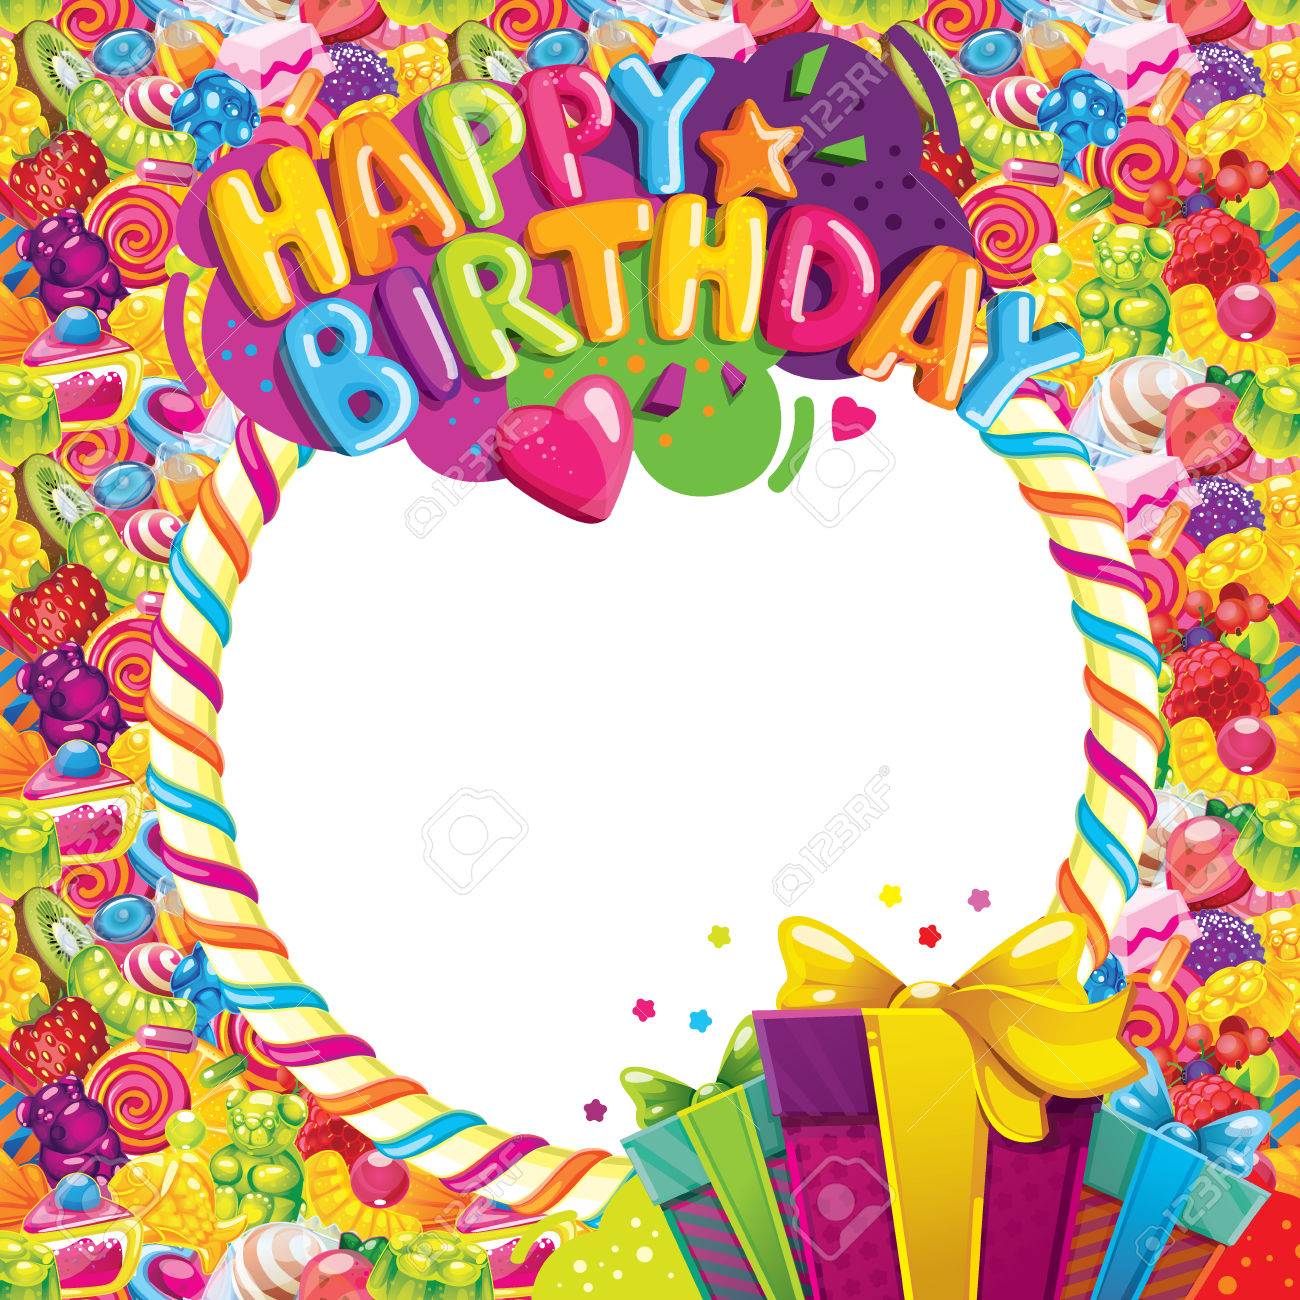 candy clipart happy birthday